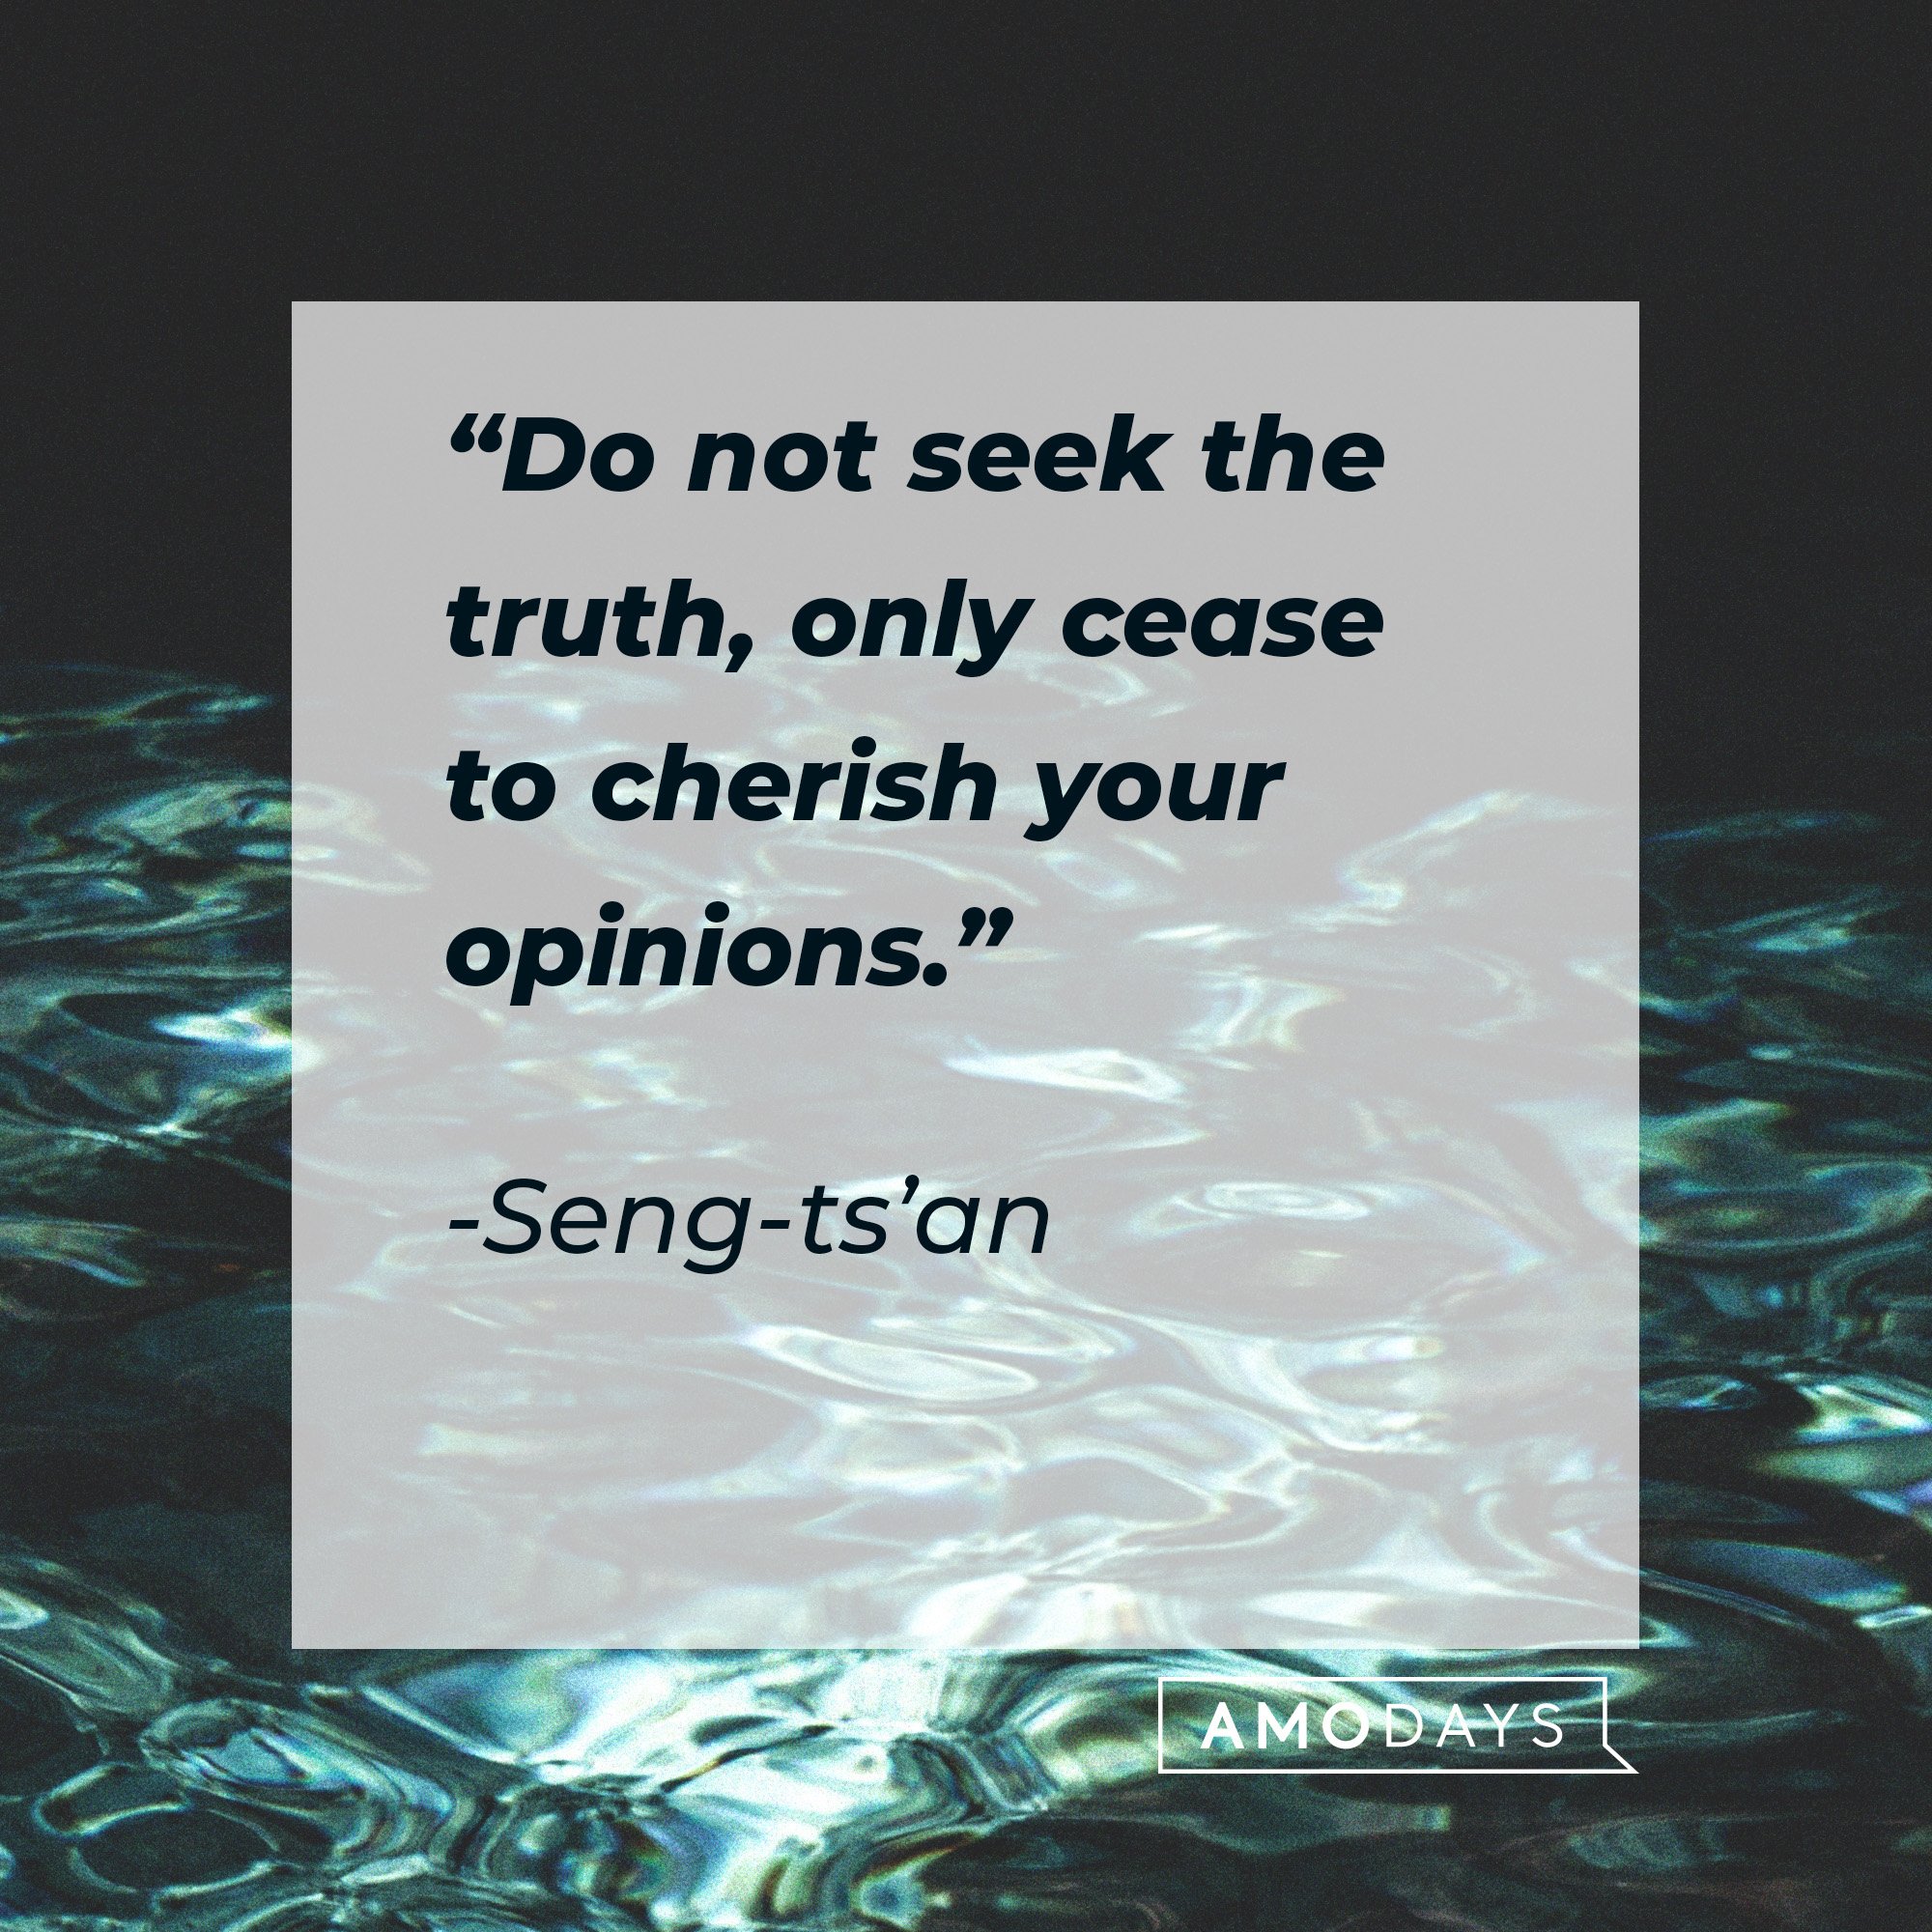 Seng-ts’an's quote: “Do not seek the truth, only cease to cherish your opinions.” | Image: AmoDays